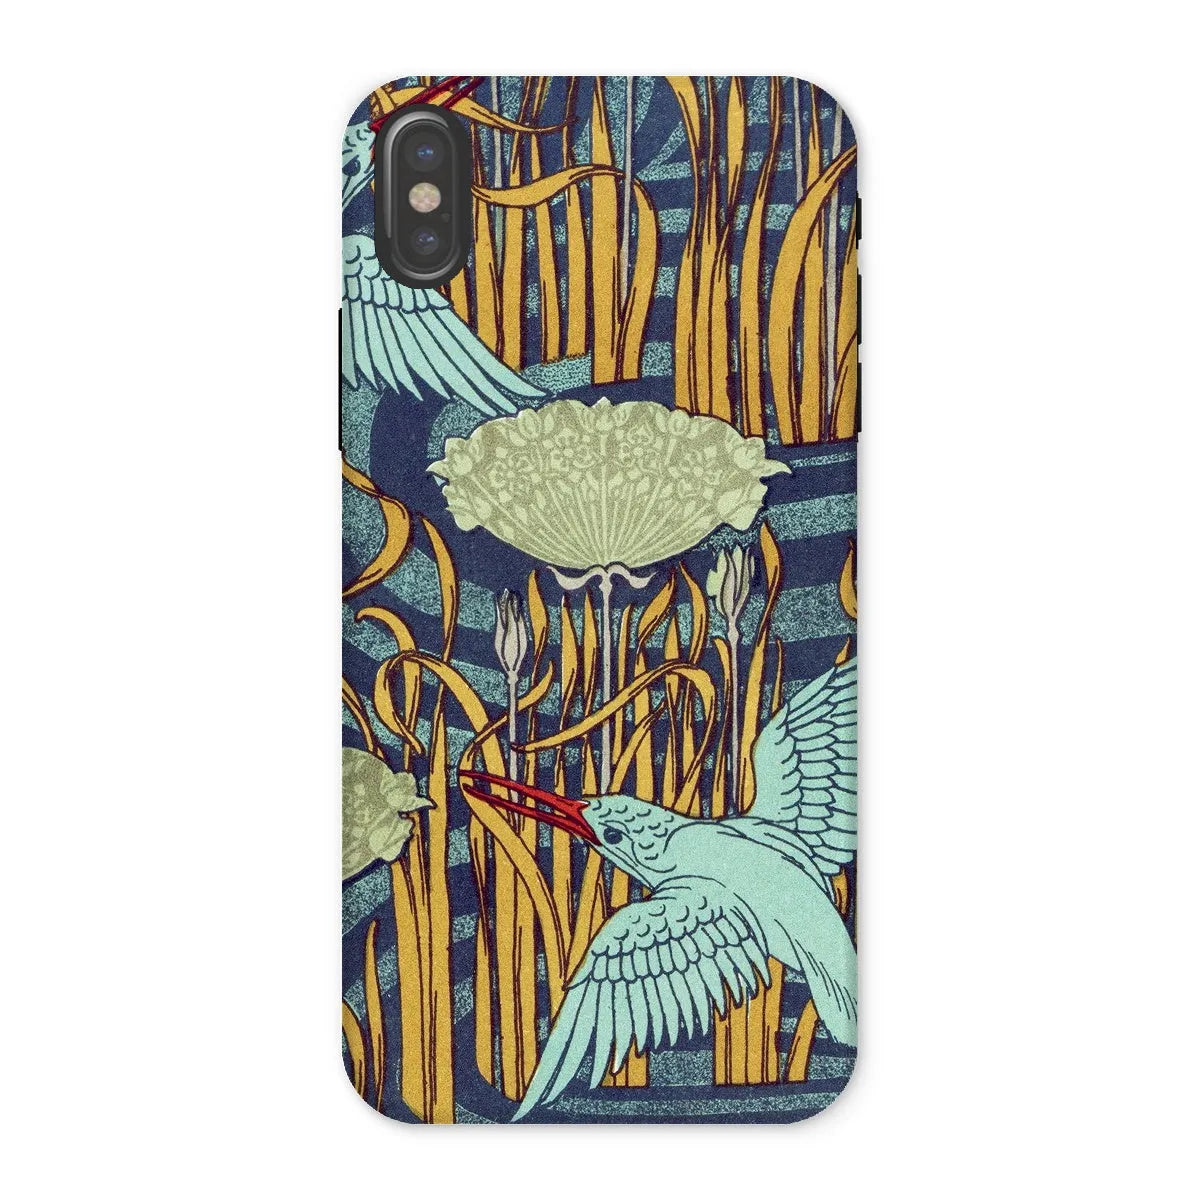 Kingfishers French Art Phone Case - Maurice Pillard Verneuil - Iphone x / Matte - Mobile Phone Cases - Aesthetic Art